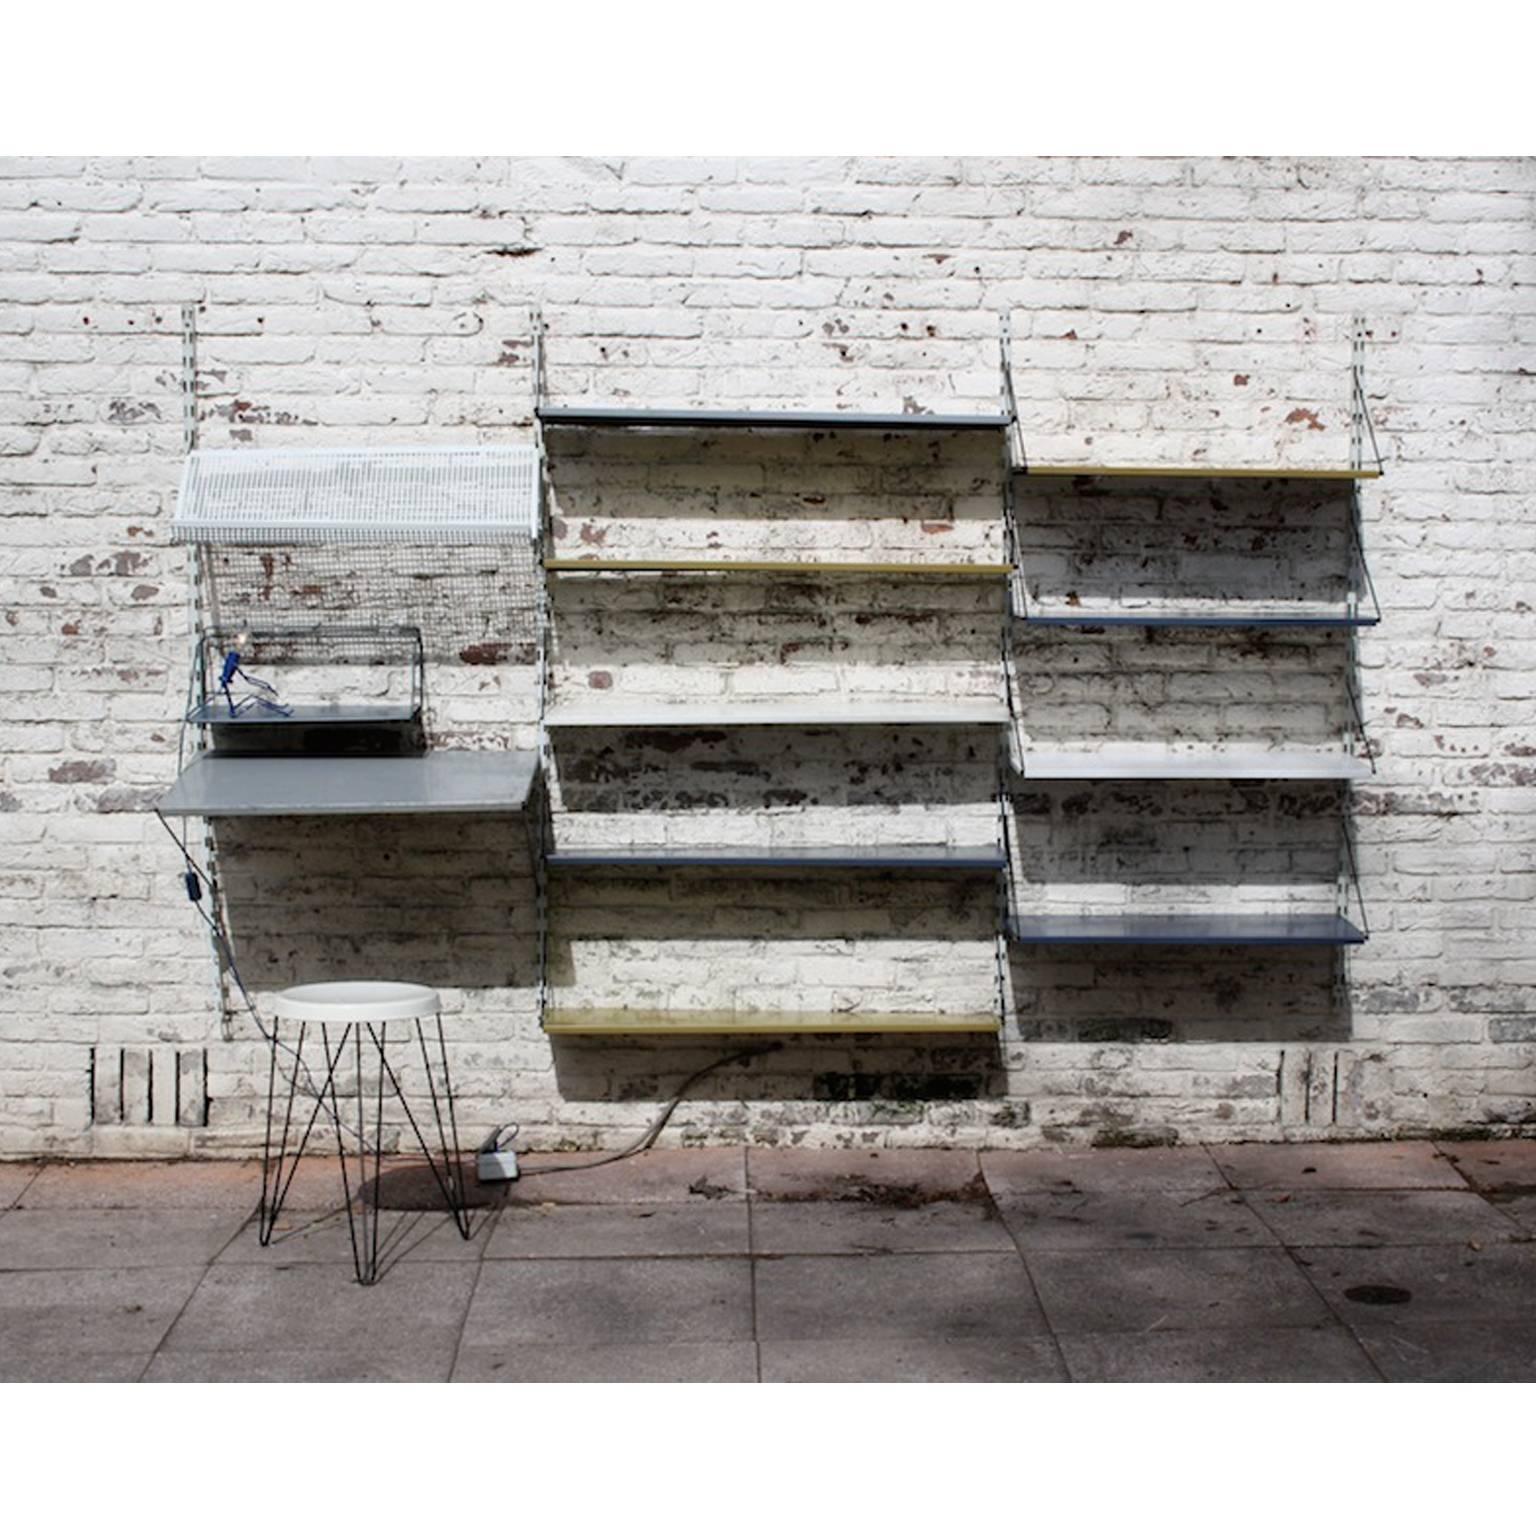 Mid-Century Modern Wall System or Unit by Tjerk Reijenga for Pilastro, Dutch Design, 1955 For Sale